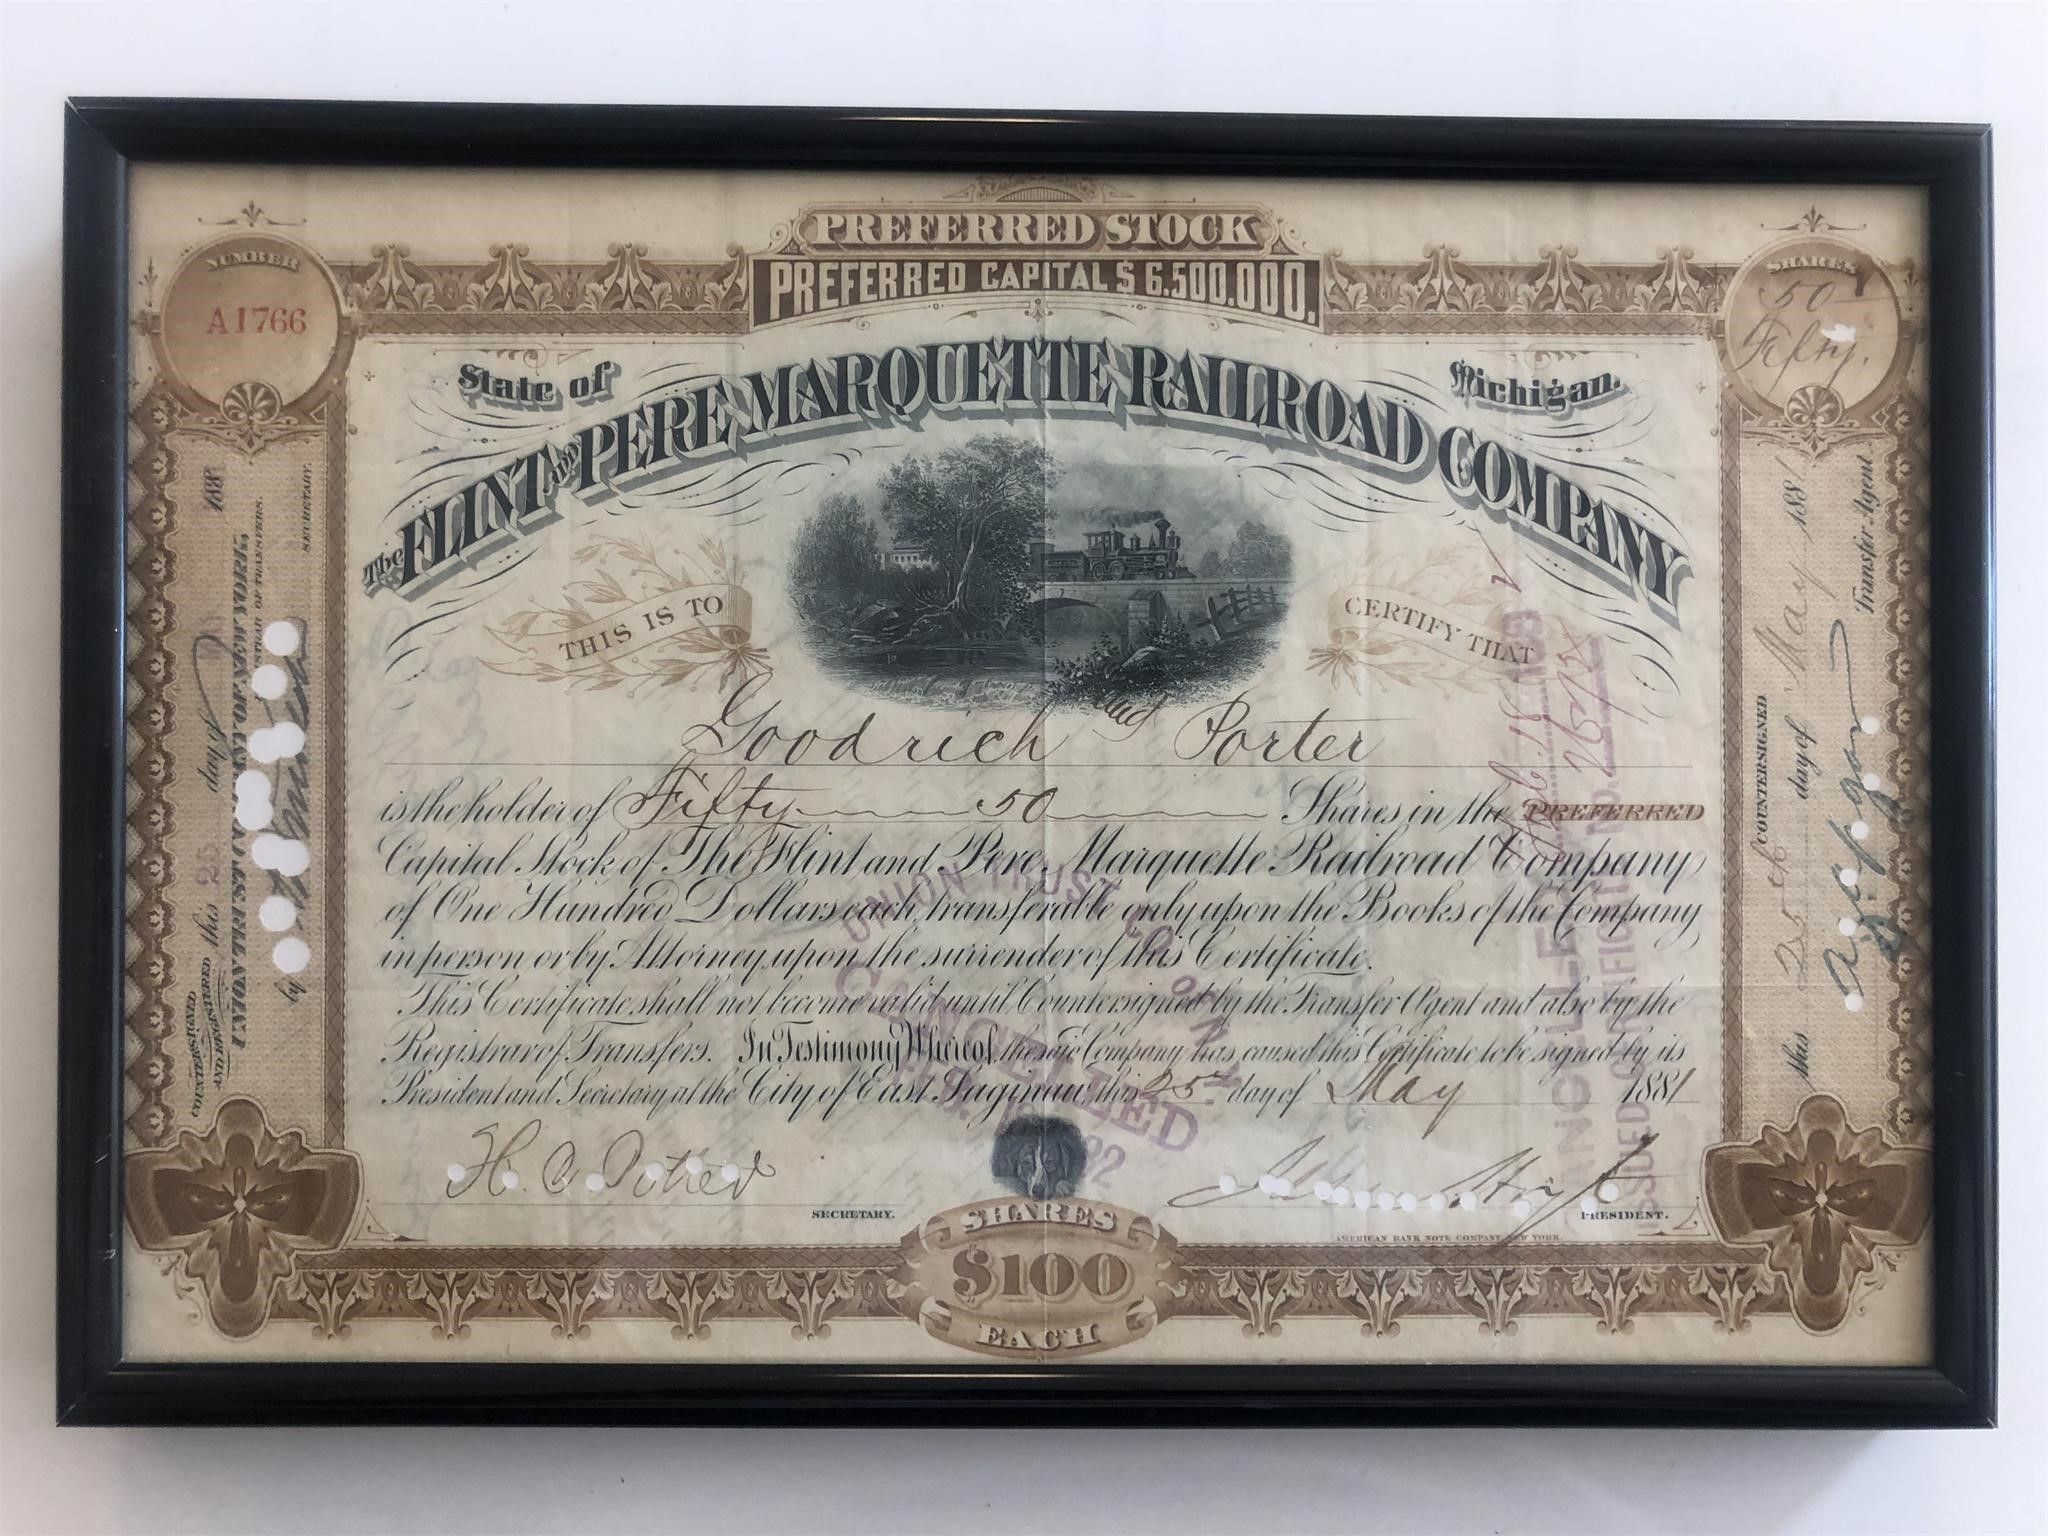 Framed The Flint and Pere Marquette Railroad Compa